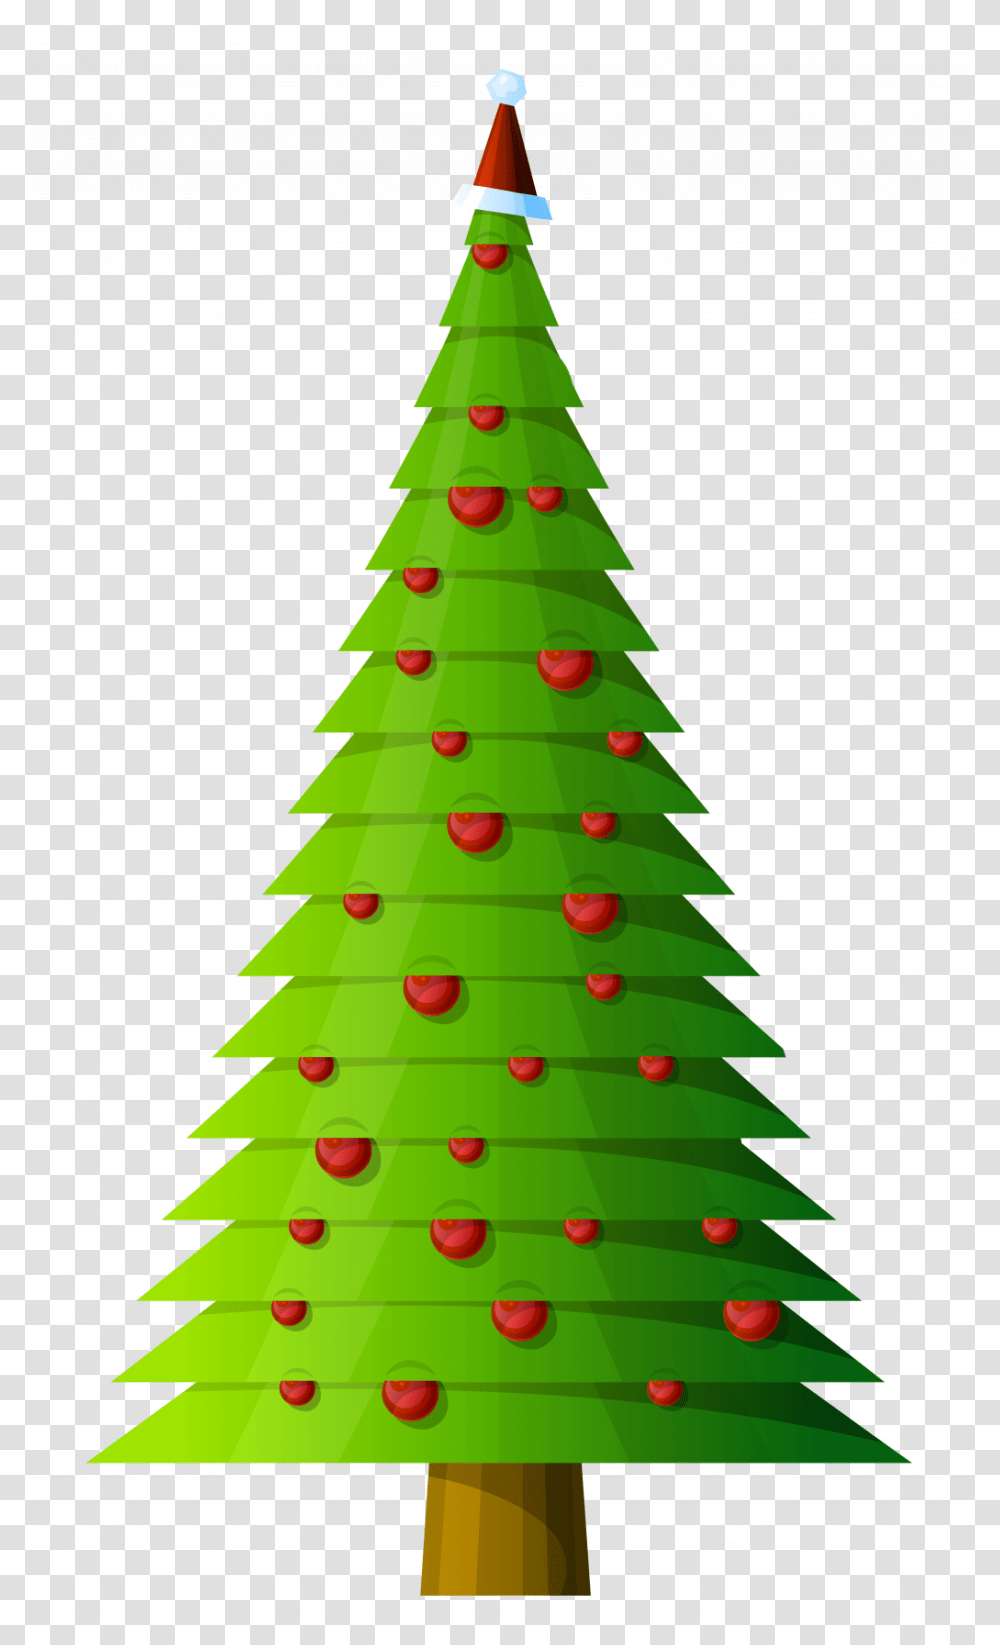 Christmas Tree Clipart Top Border Free Christmas Tree Graphic, Ornament, Plant, Lighting, Land Transparent Png